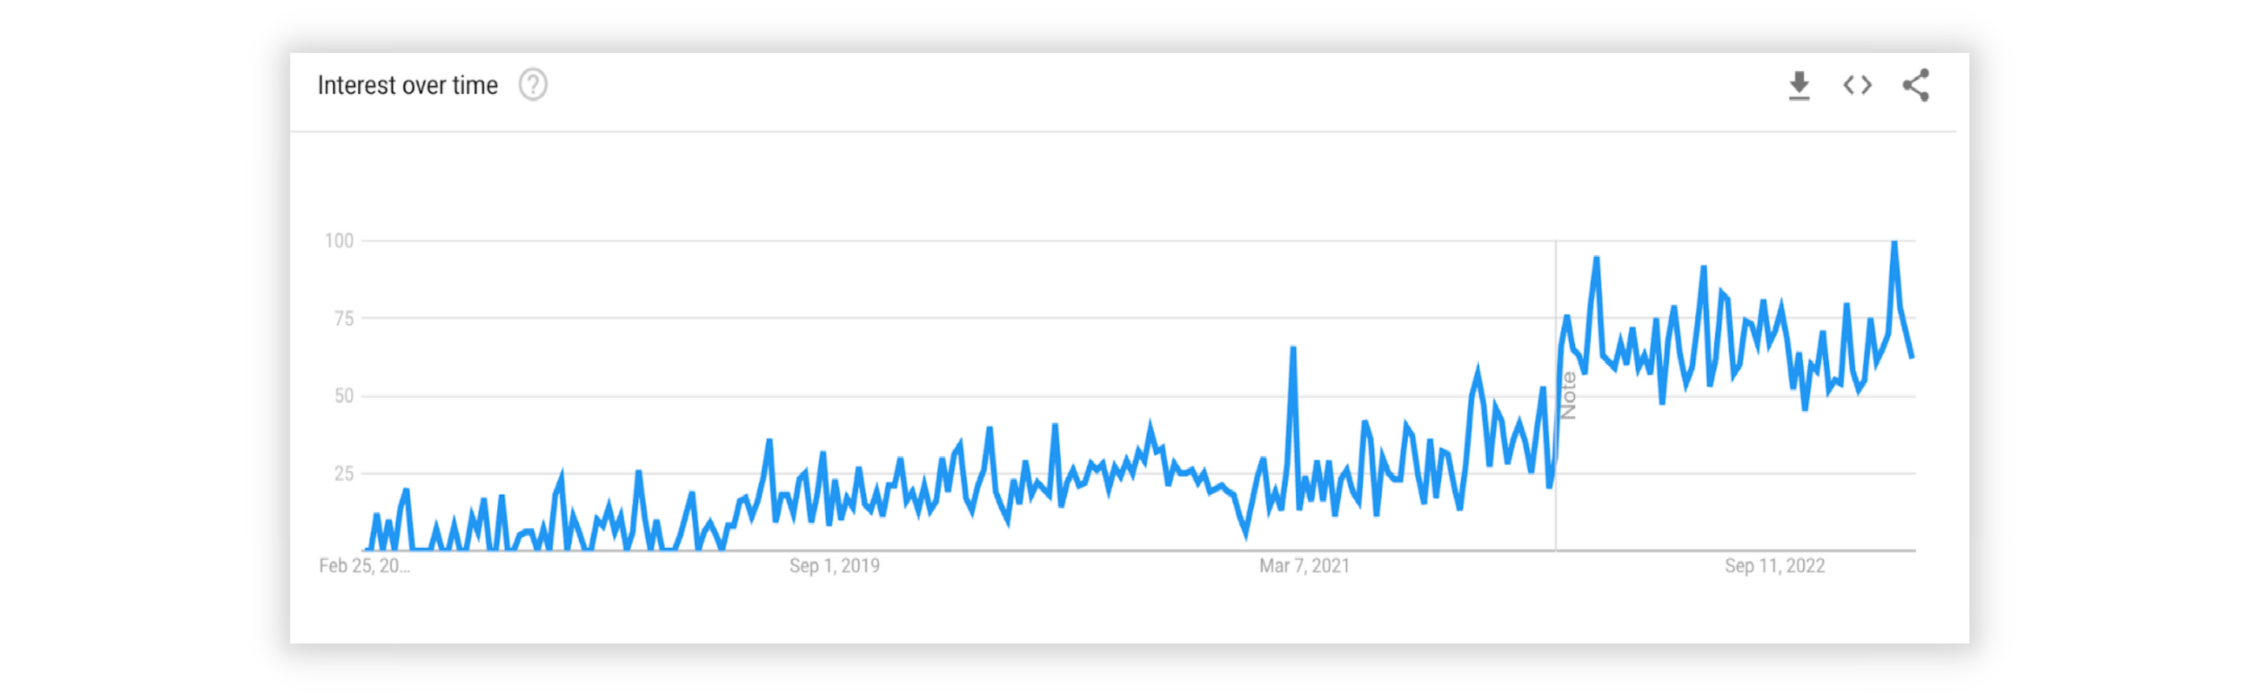 Google Trends chart for the product development trend "micro frontends"